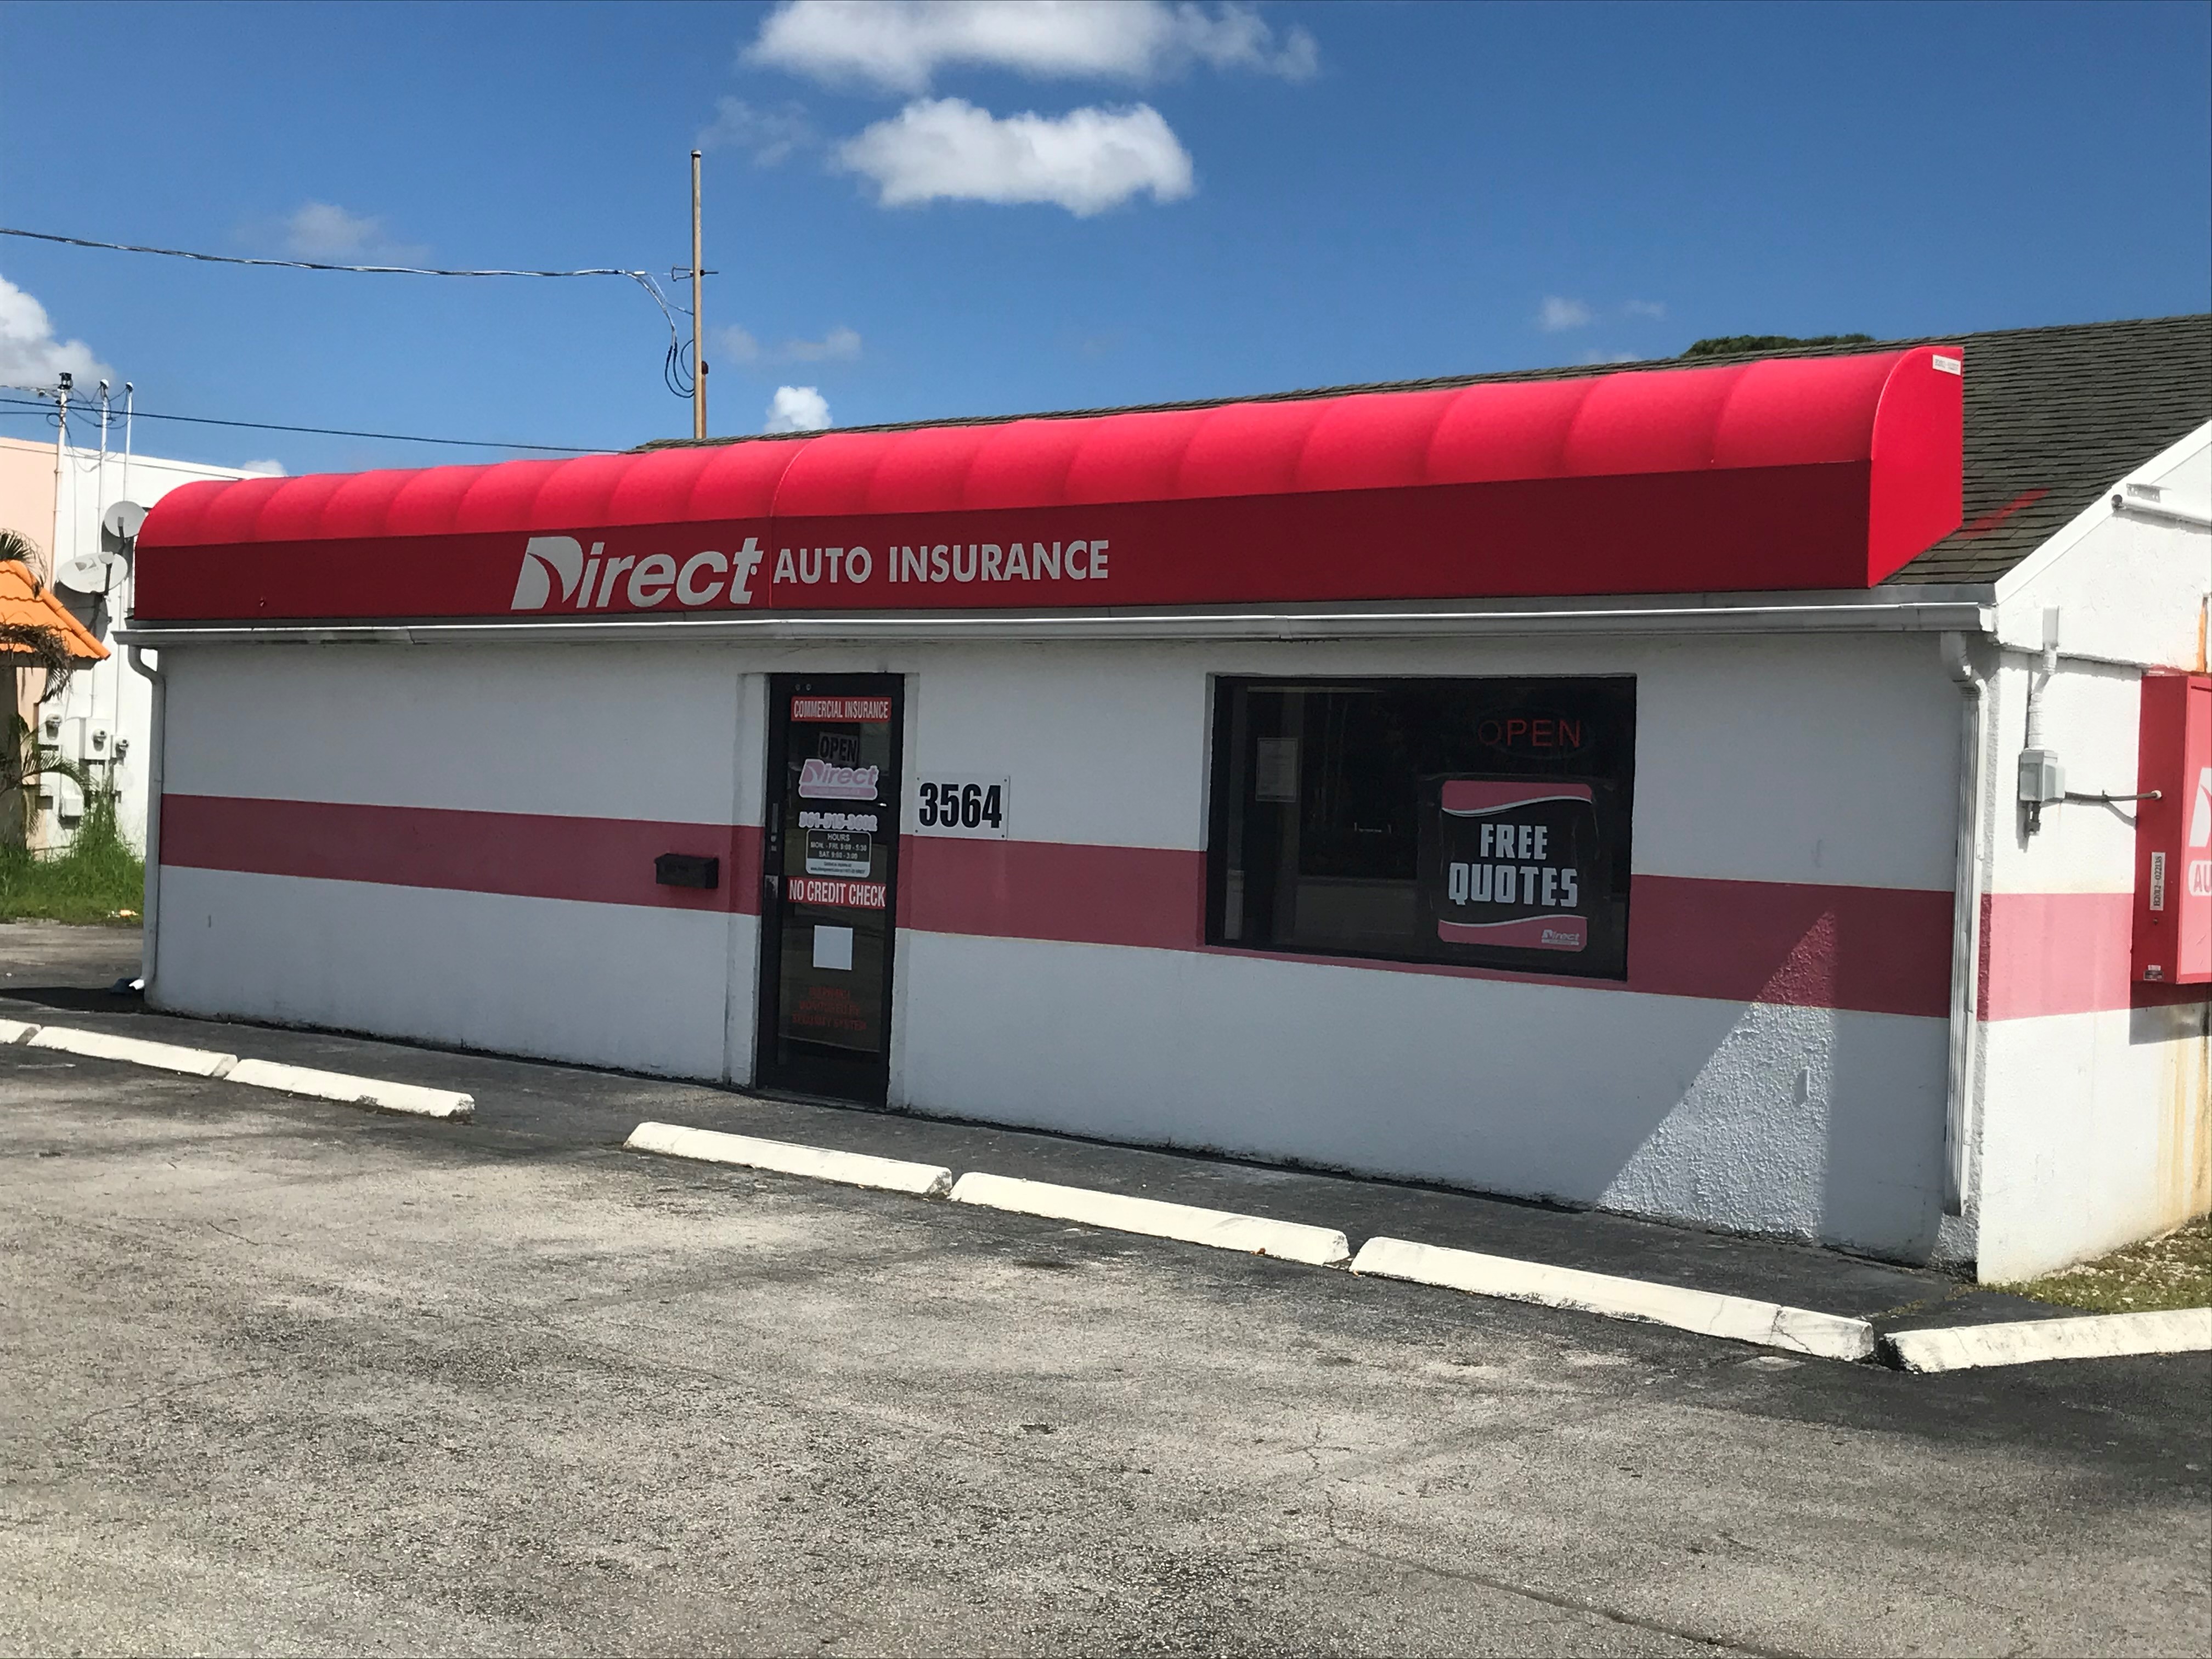 Direct Auto Insurance storefront located at  3564 South Military Trail, Lake Worth